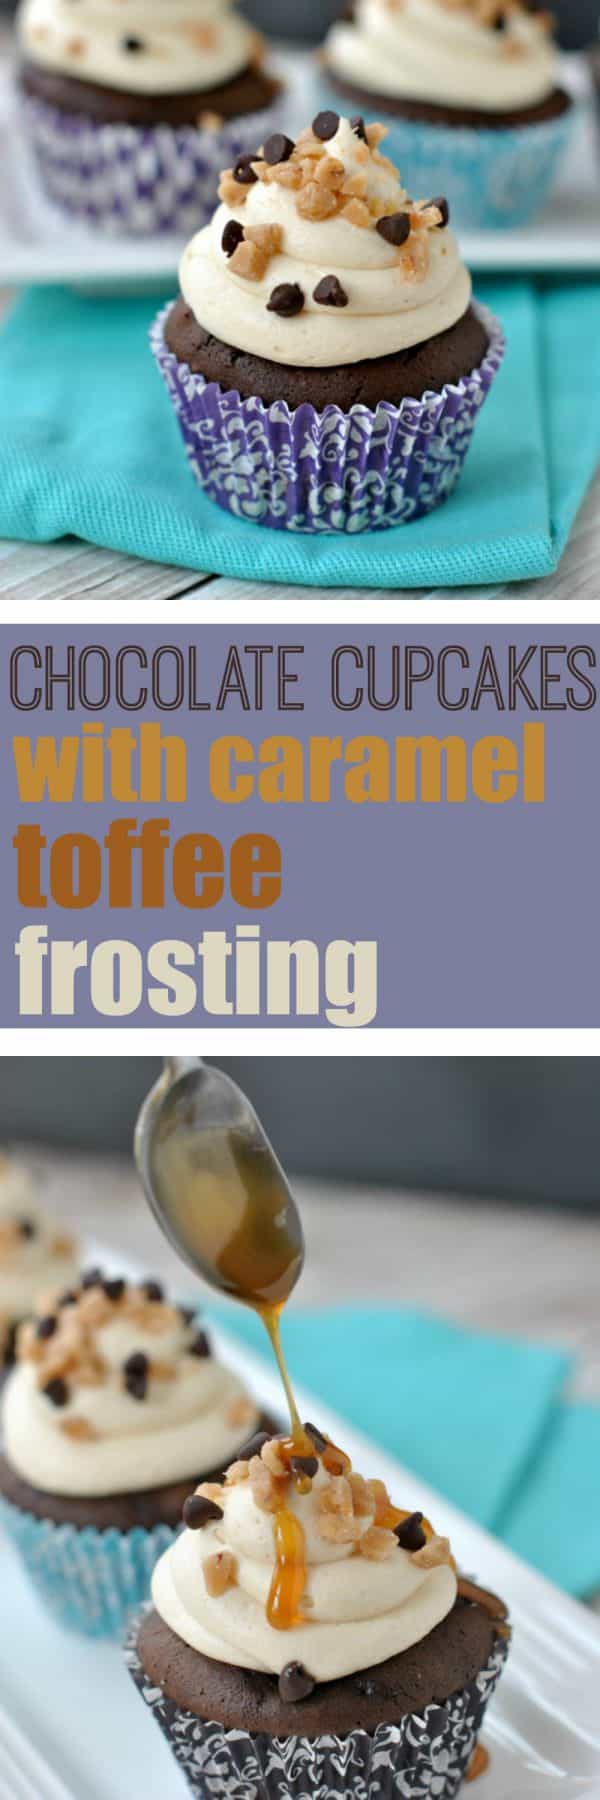 Chocolate Cupcakes {Caramel Toffee Frosting} - Shugary Sweets